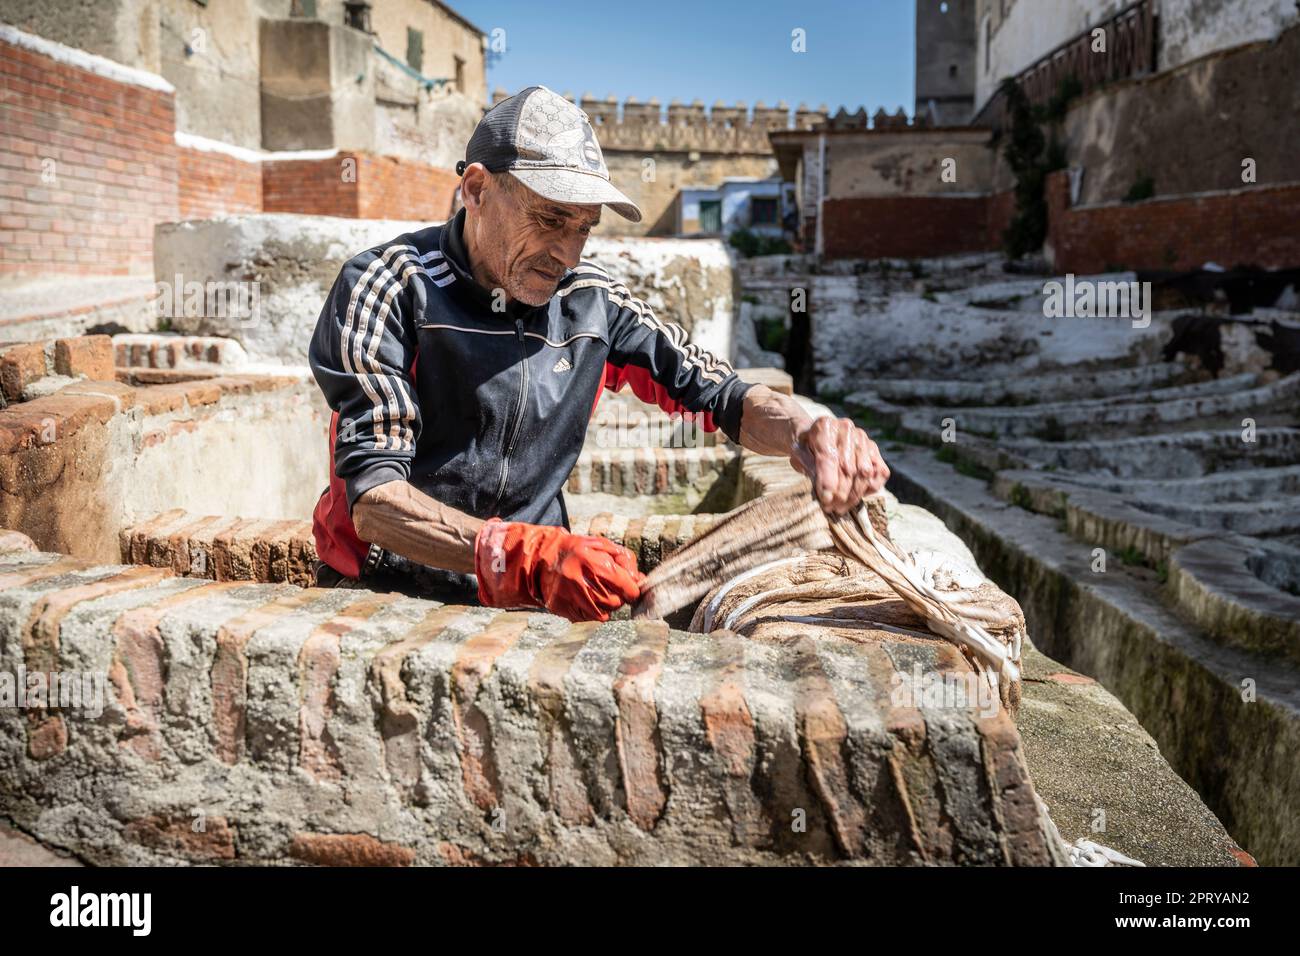 Worker in the tanneries of Tetouan handling skins inside a pool, for tanning. Stock Photo